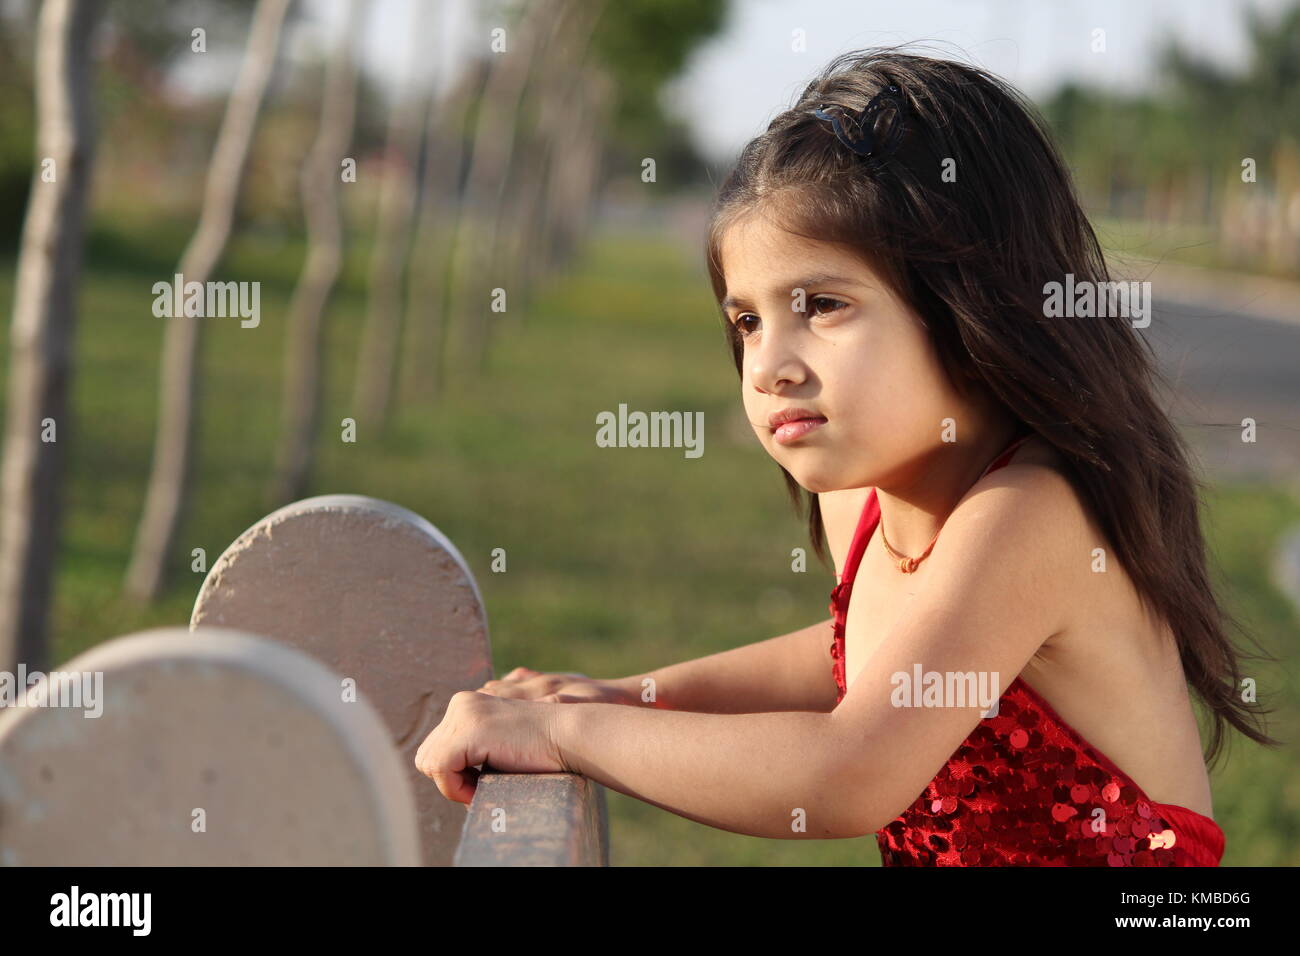 cute girl sitting in red dress beautiful kid in summer Stock Photo